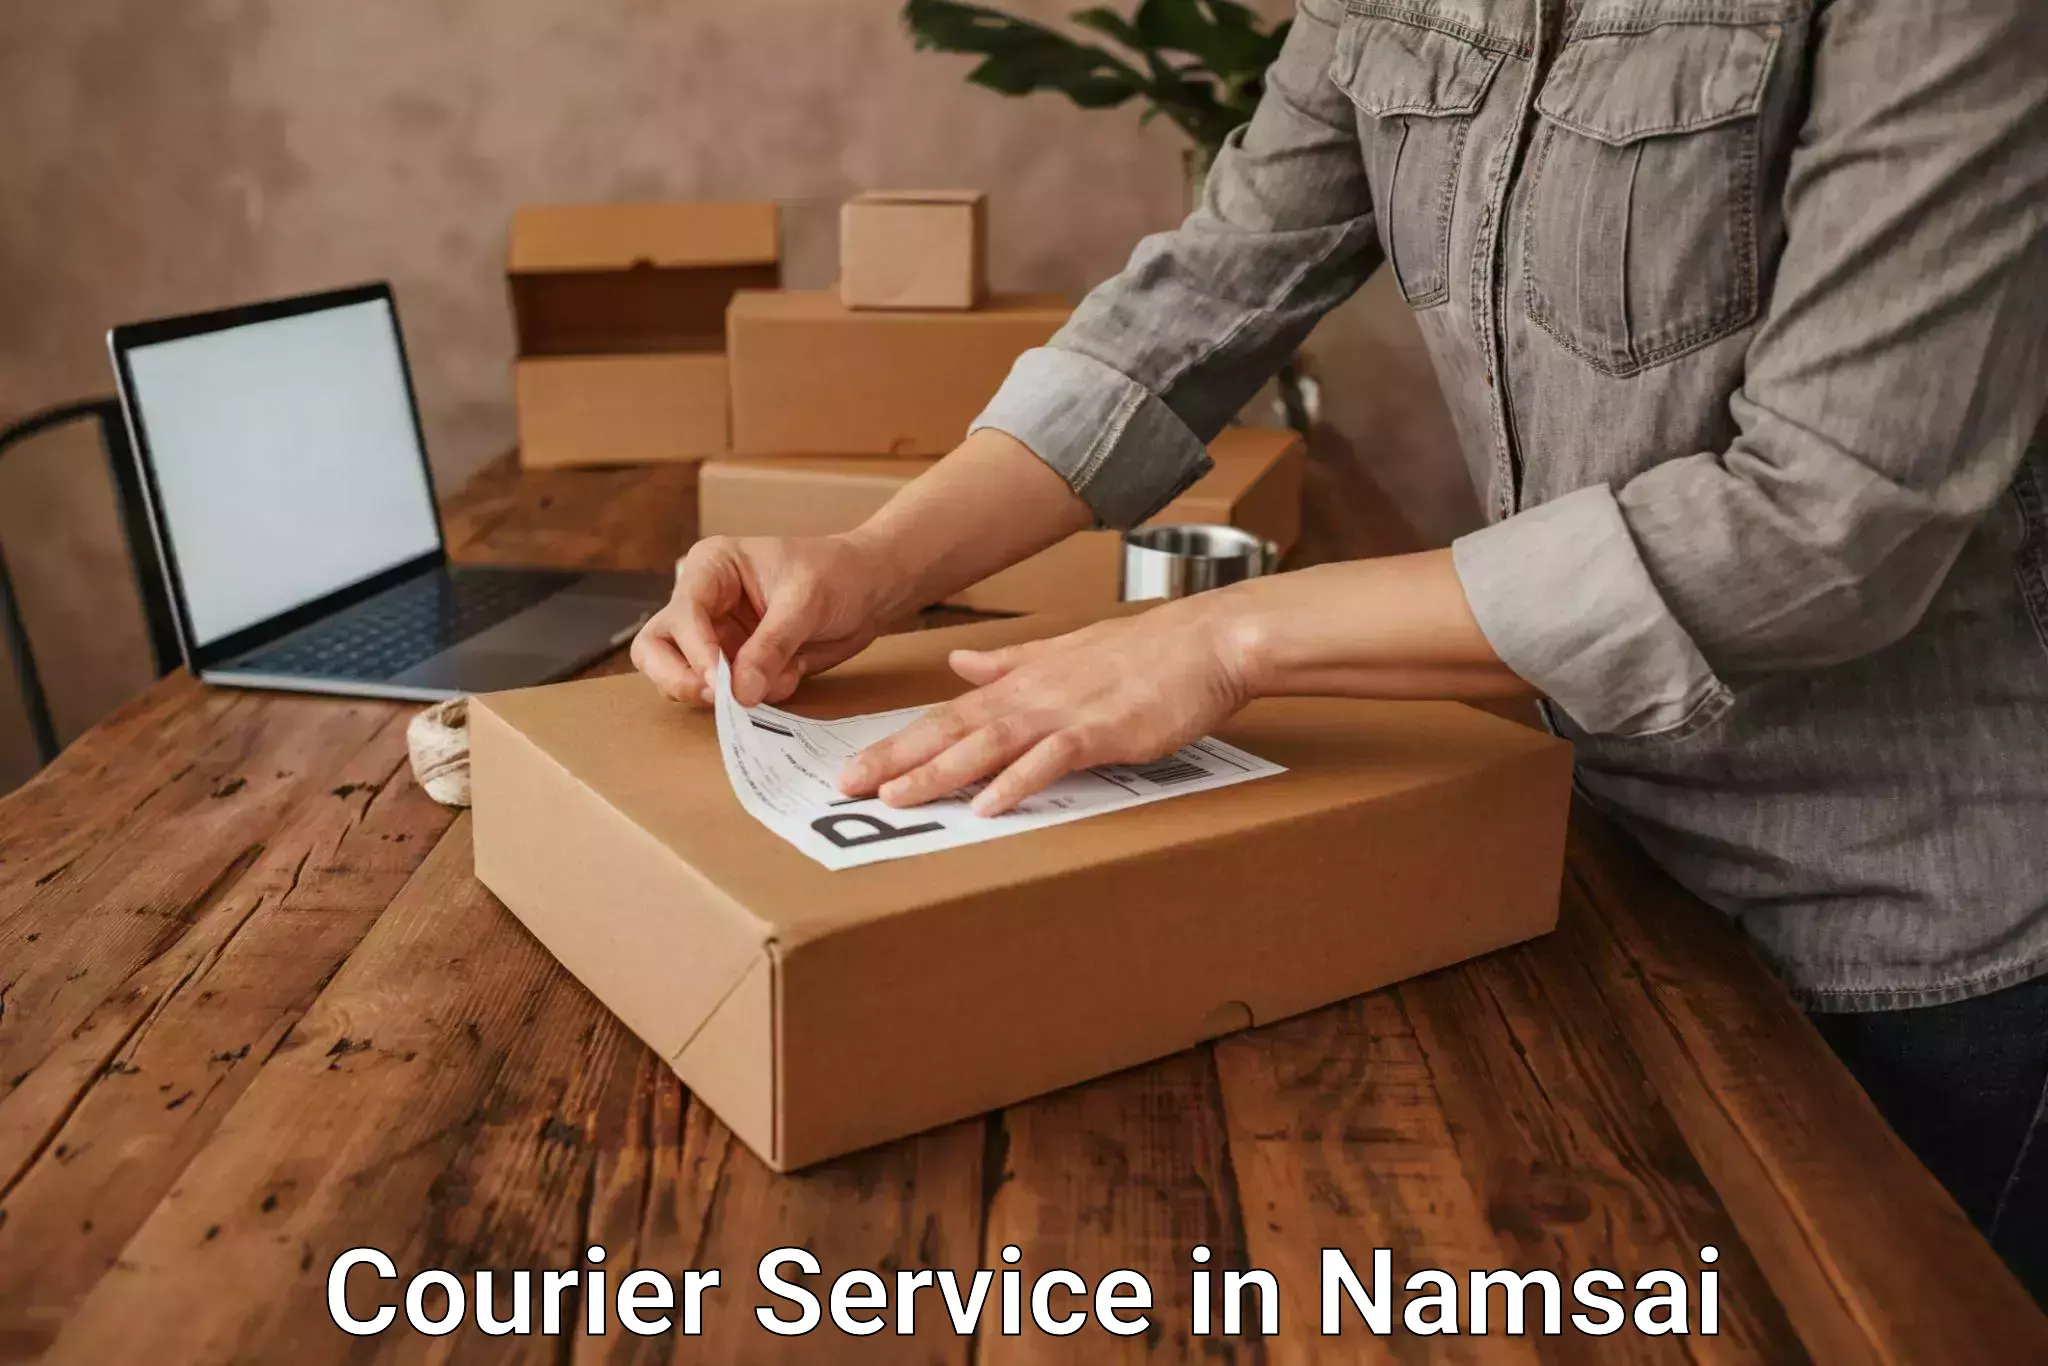 Enhanced tracking features in Namsai